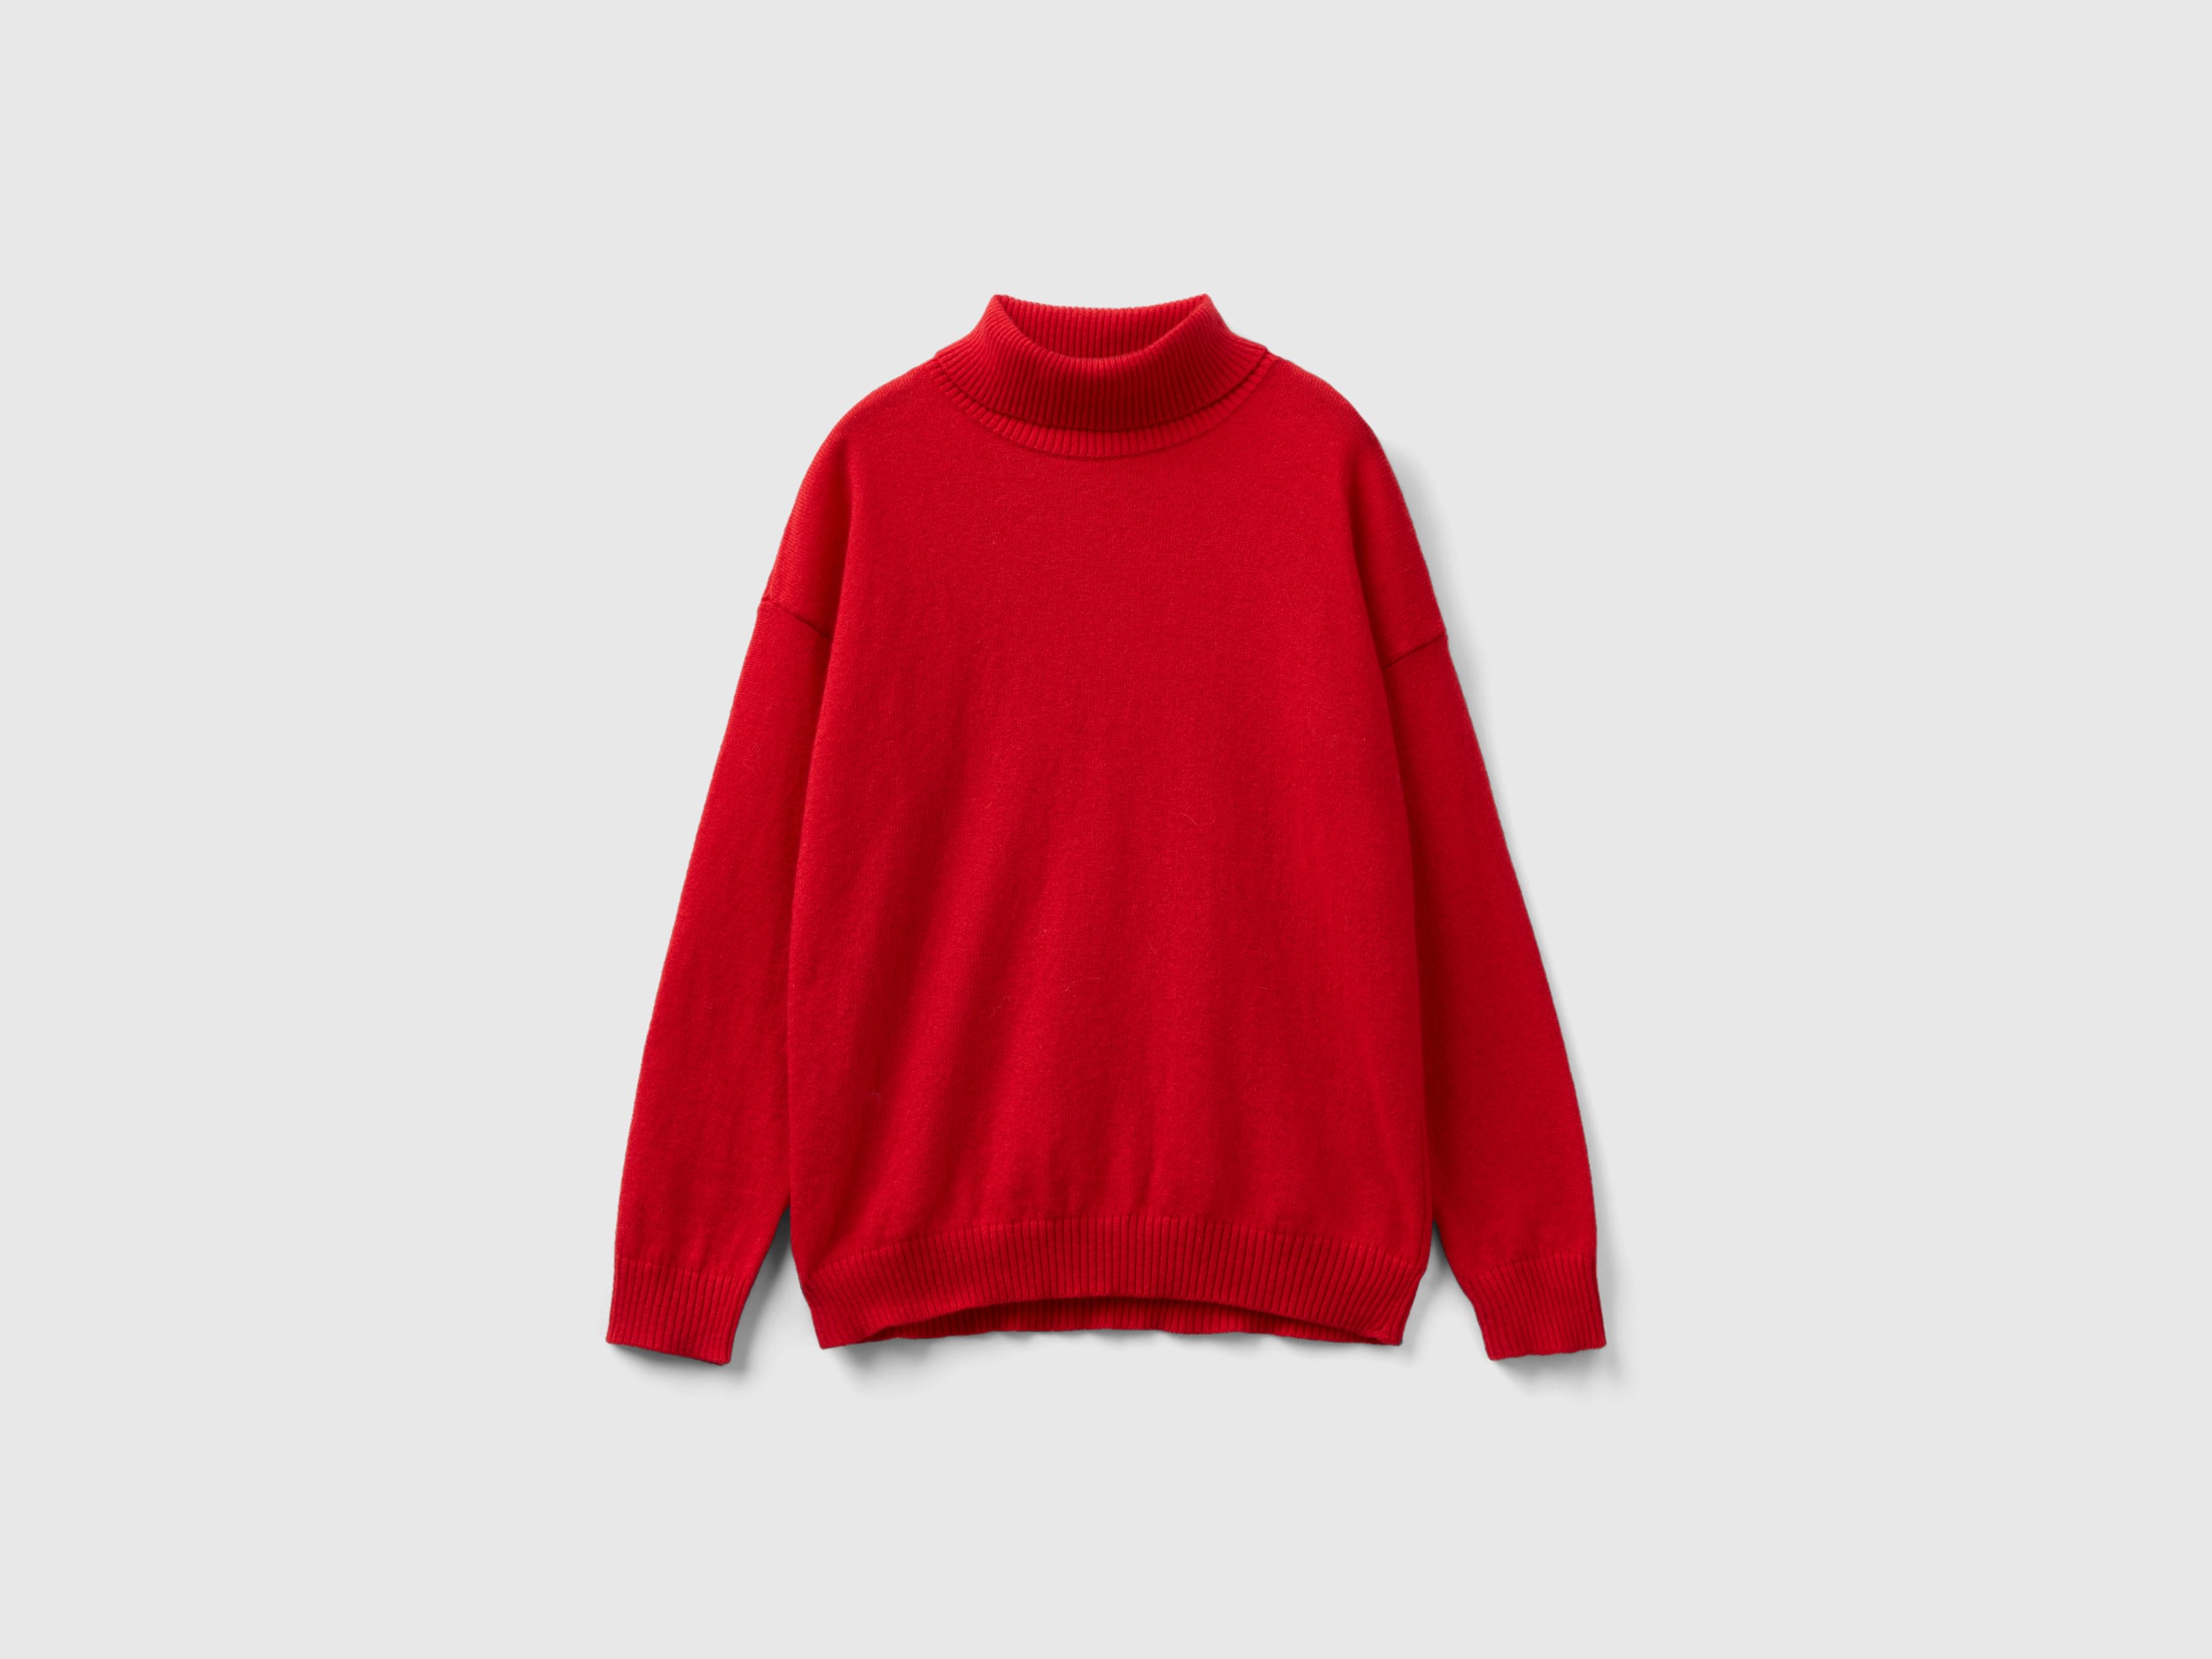 Benetton, Turtleneck Sweater In Cashmere And Wool Blend, size M, Red, Kids